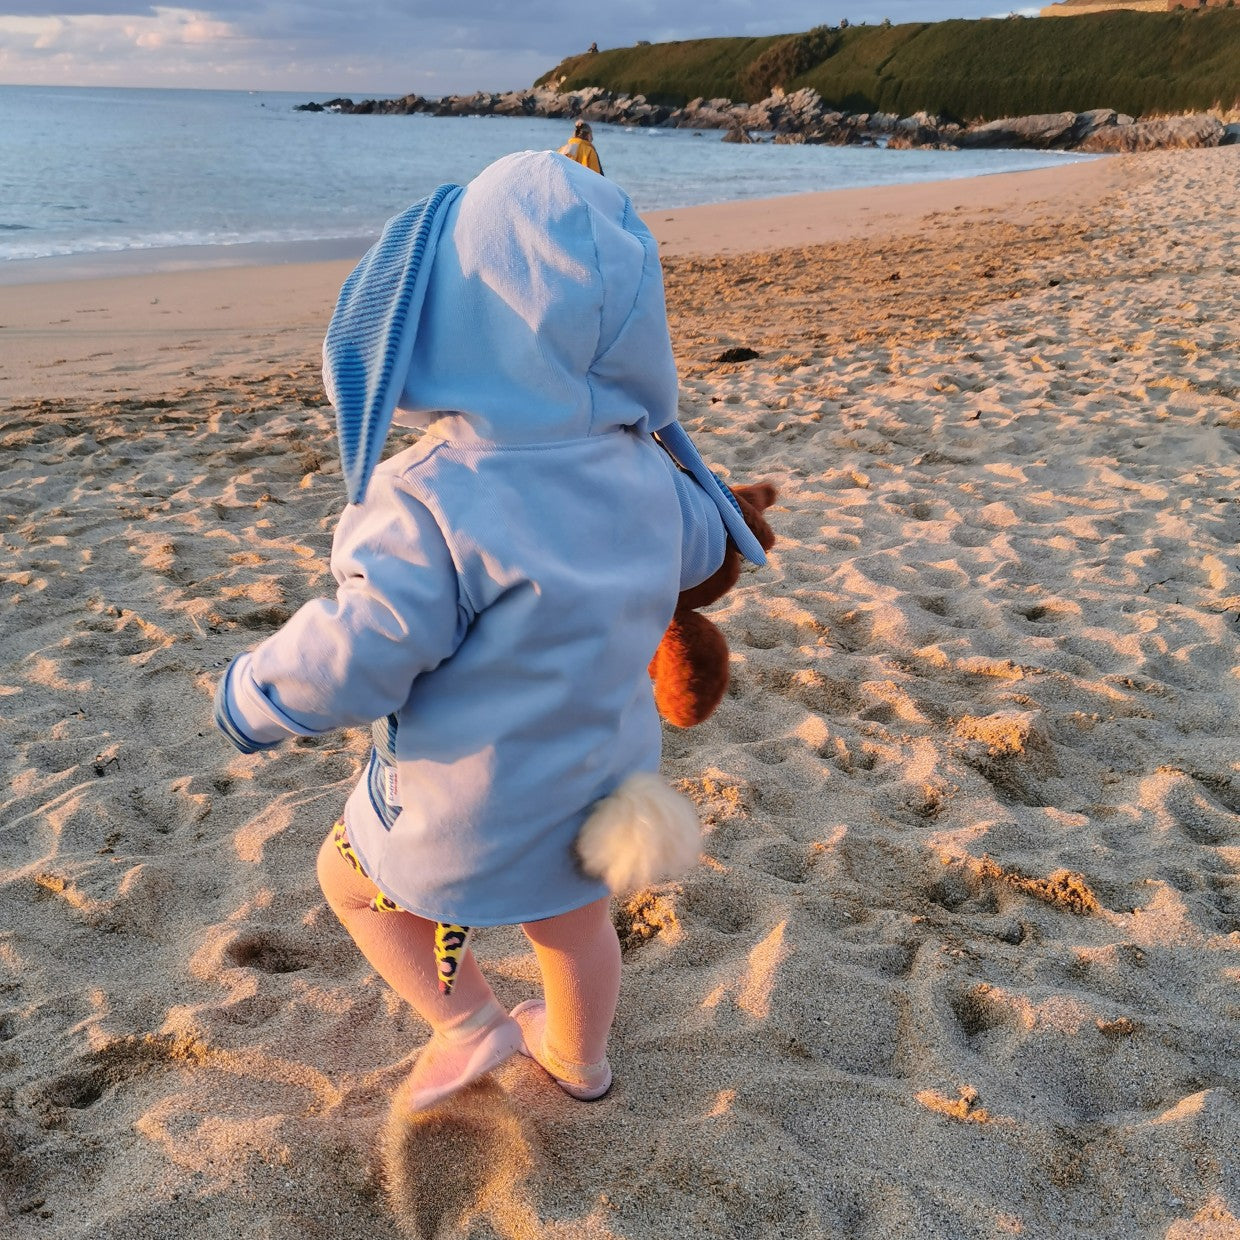 View of toddler wearing blue bunny coat on a beach. Showing bunny tail and ears.